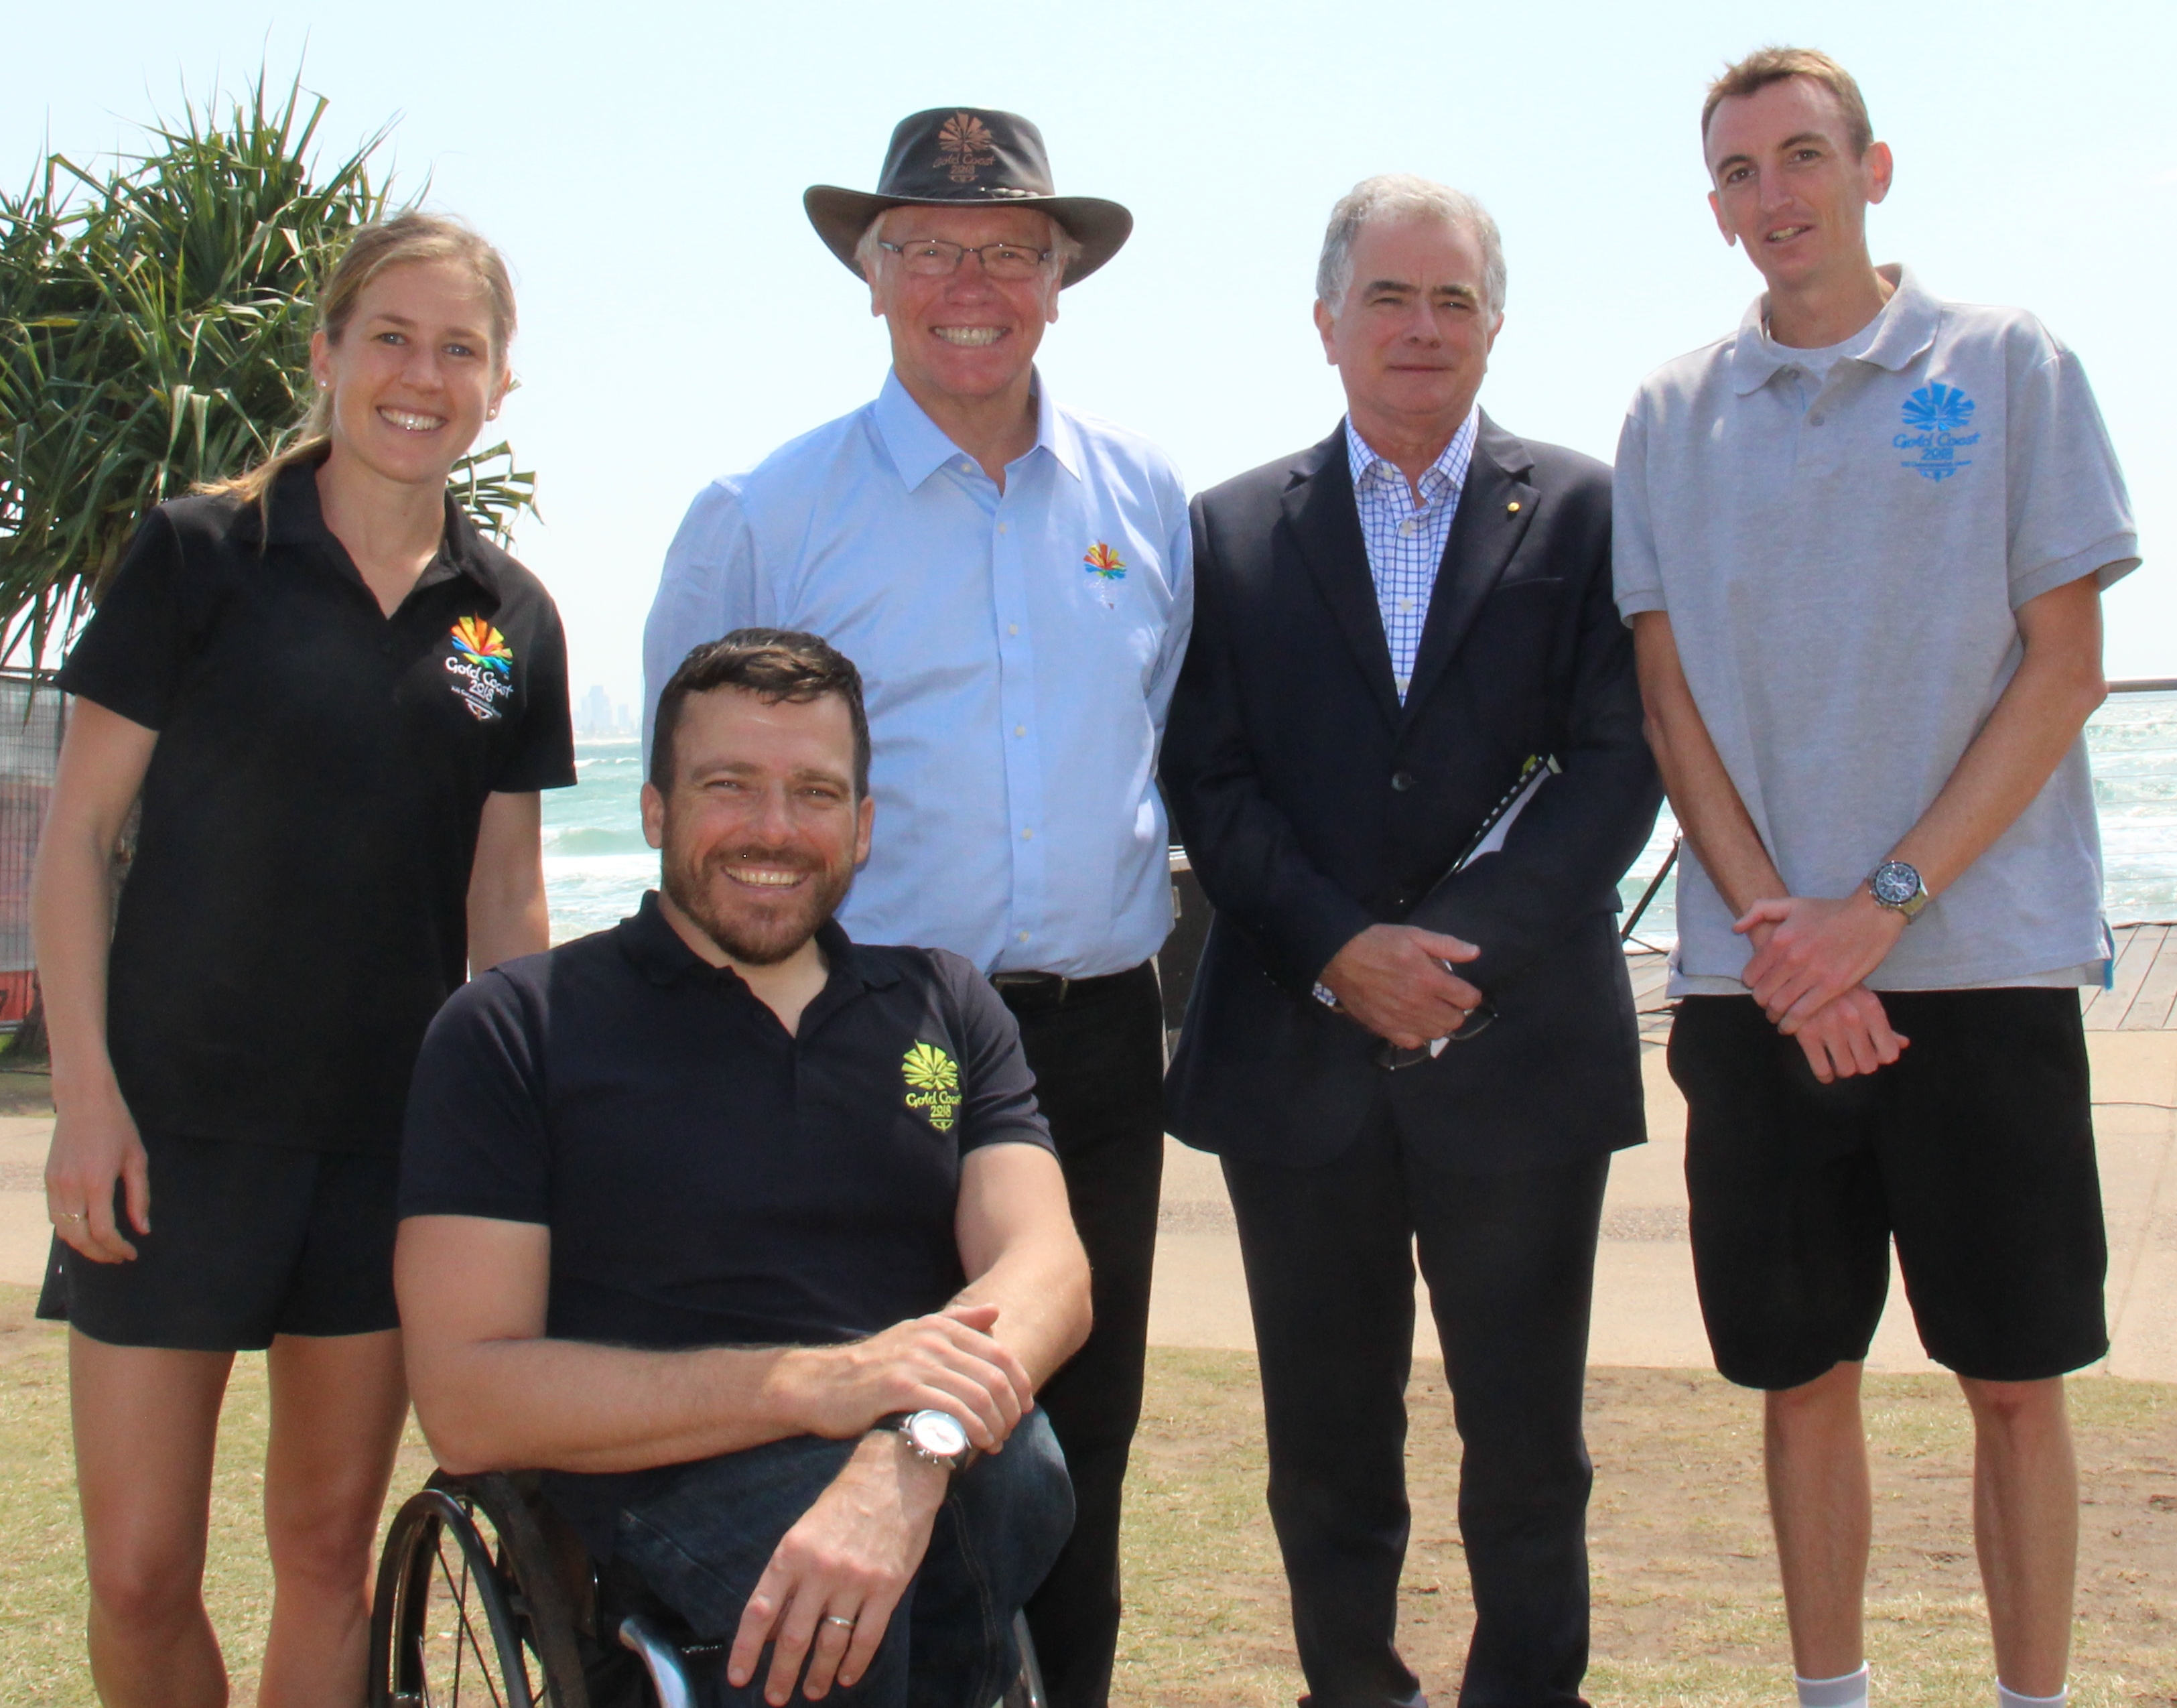 Profeossor Ian O'Connor AC pictured with marathon champions, Kurt Fearnley OAM (front), Michael Shelley and Jessica Trengove, and GOLDOC CEO Peter Beattie AC at the announcement of the GC2018 marathon route.